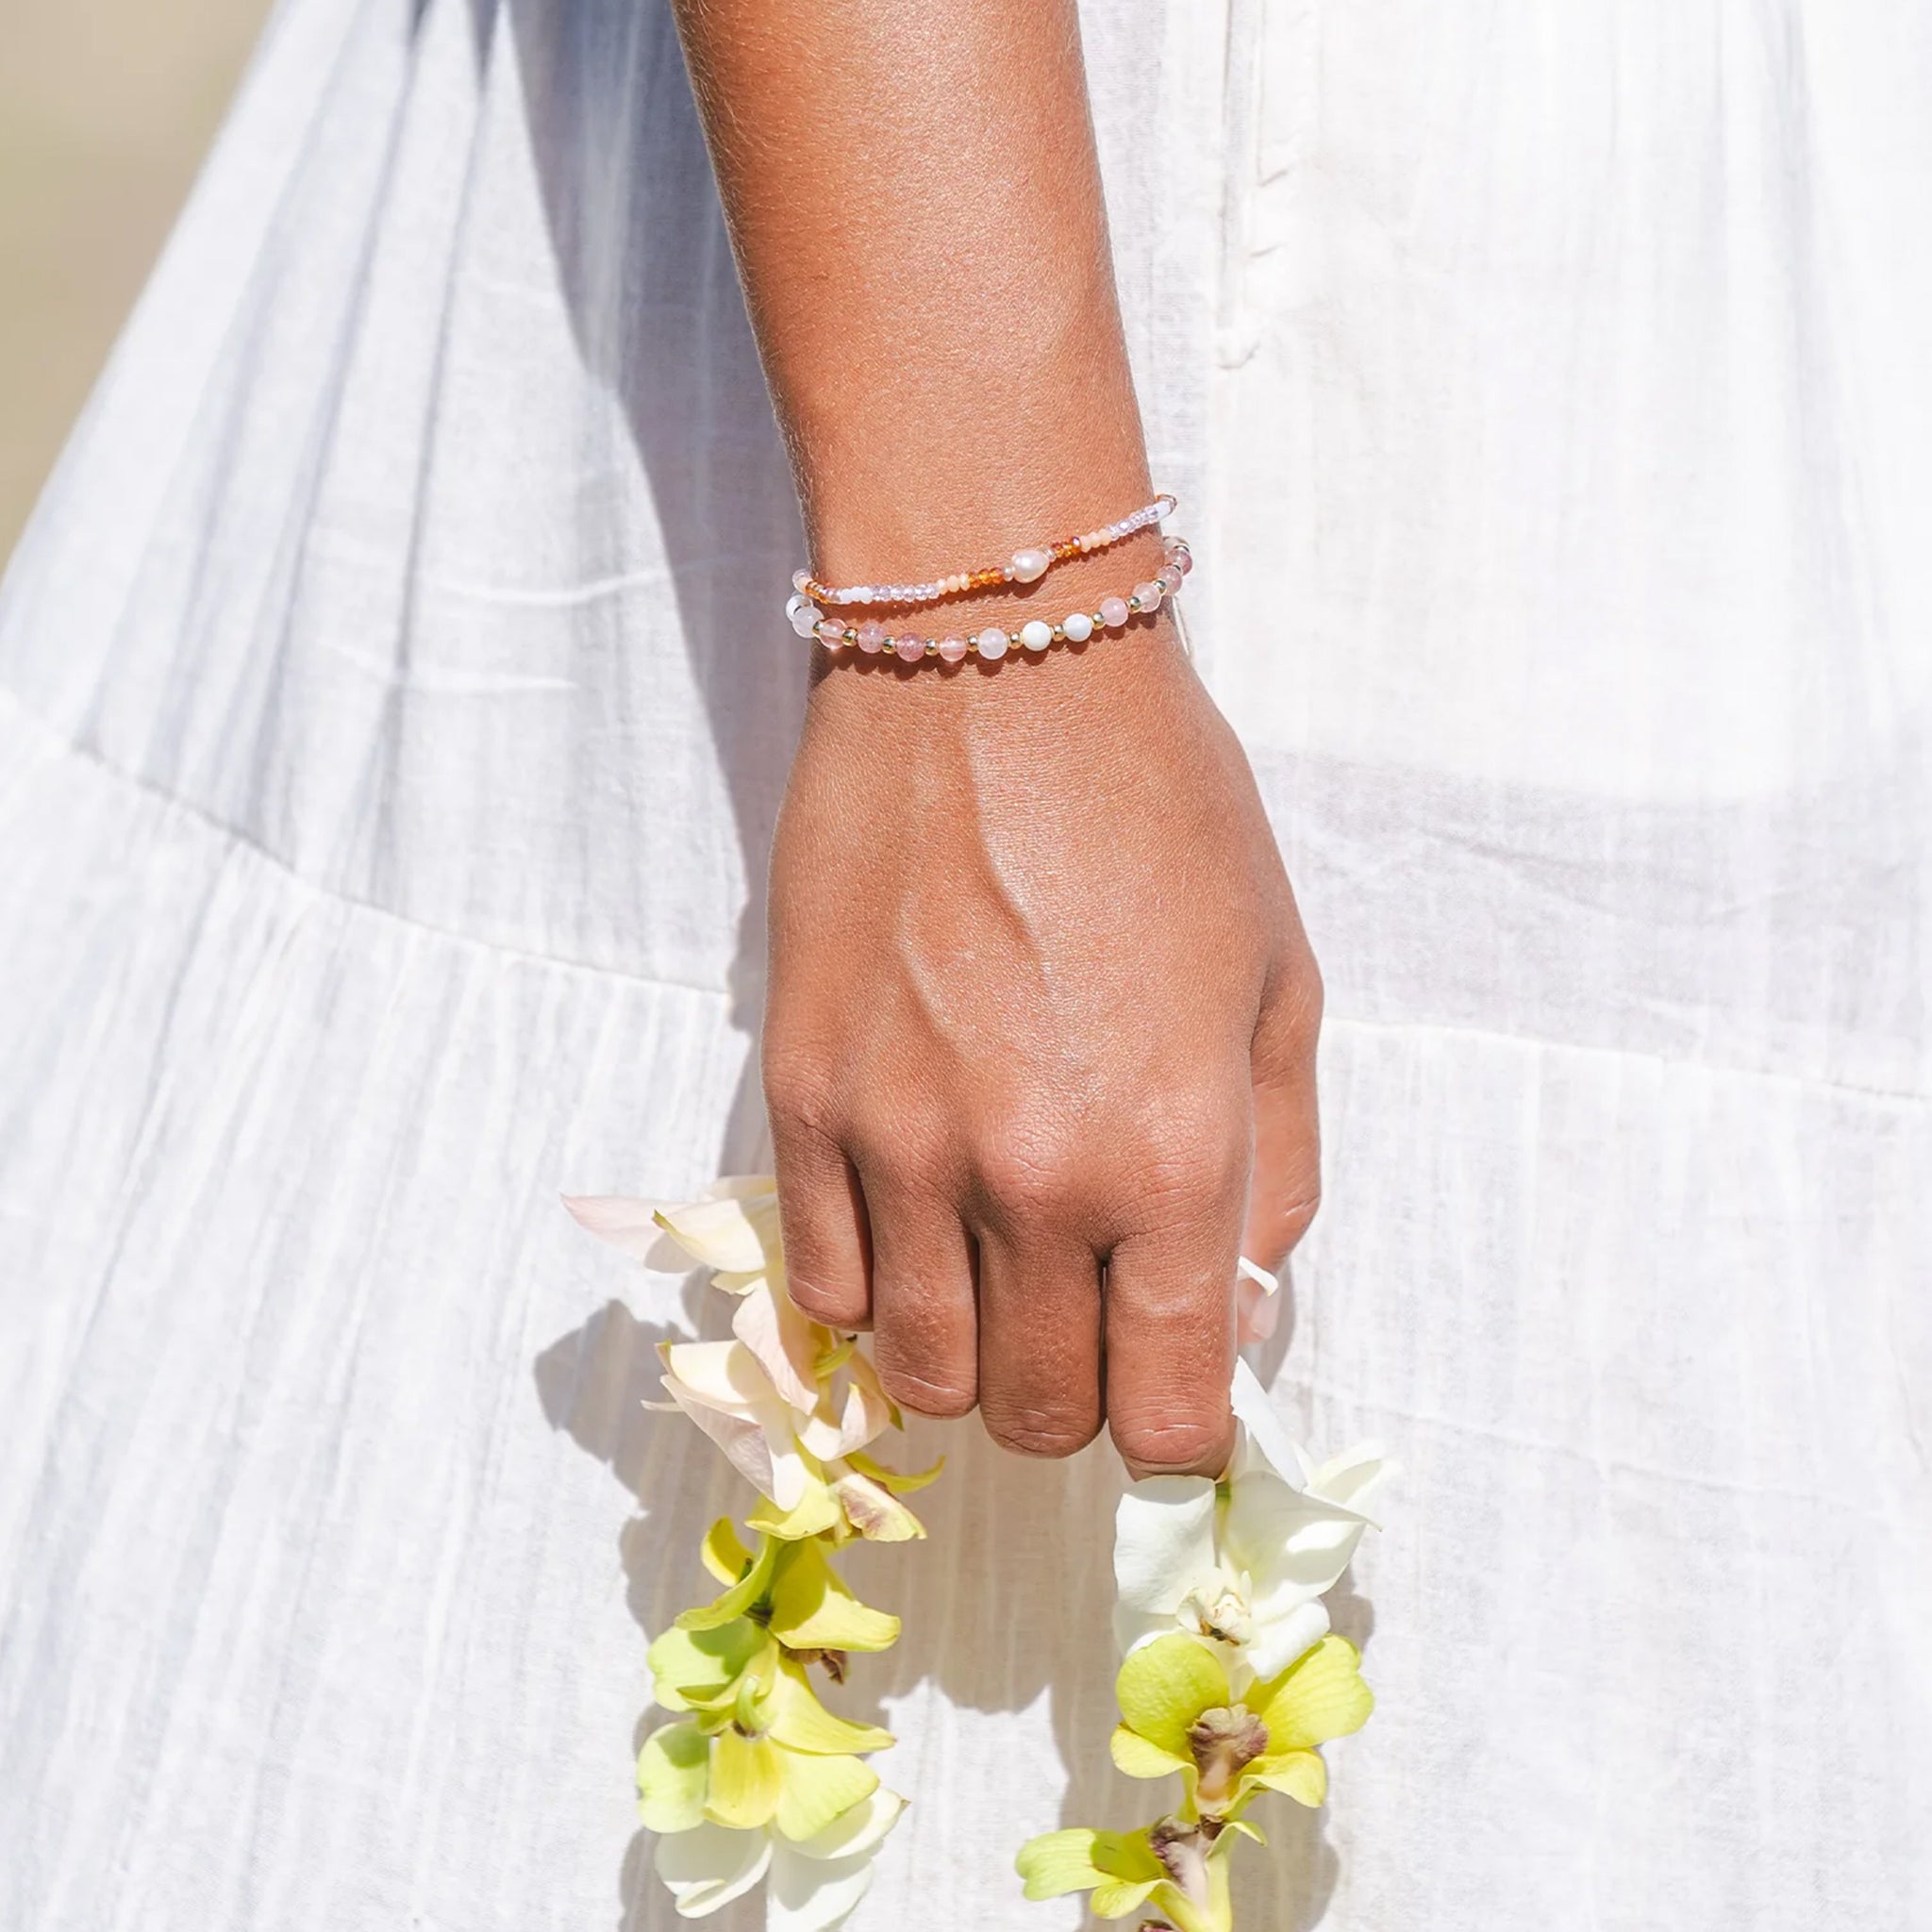 A peachy and white beaded bracelet with an adjustable cord detail.